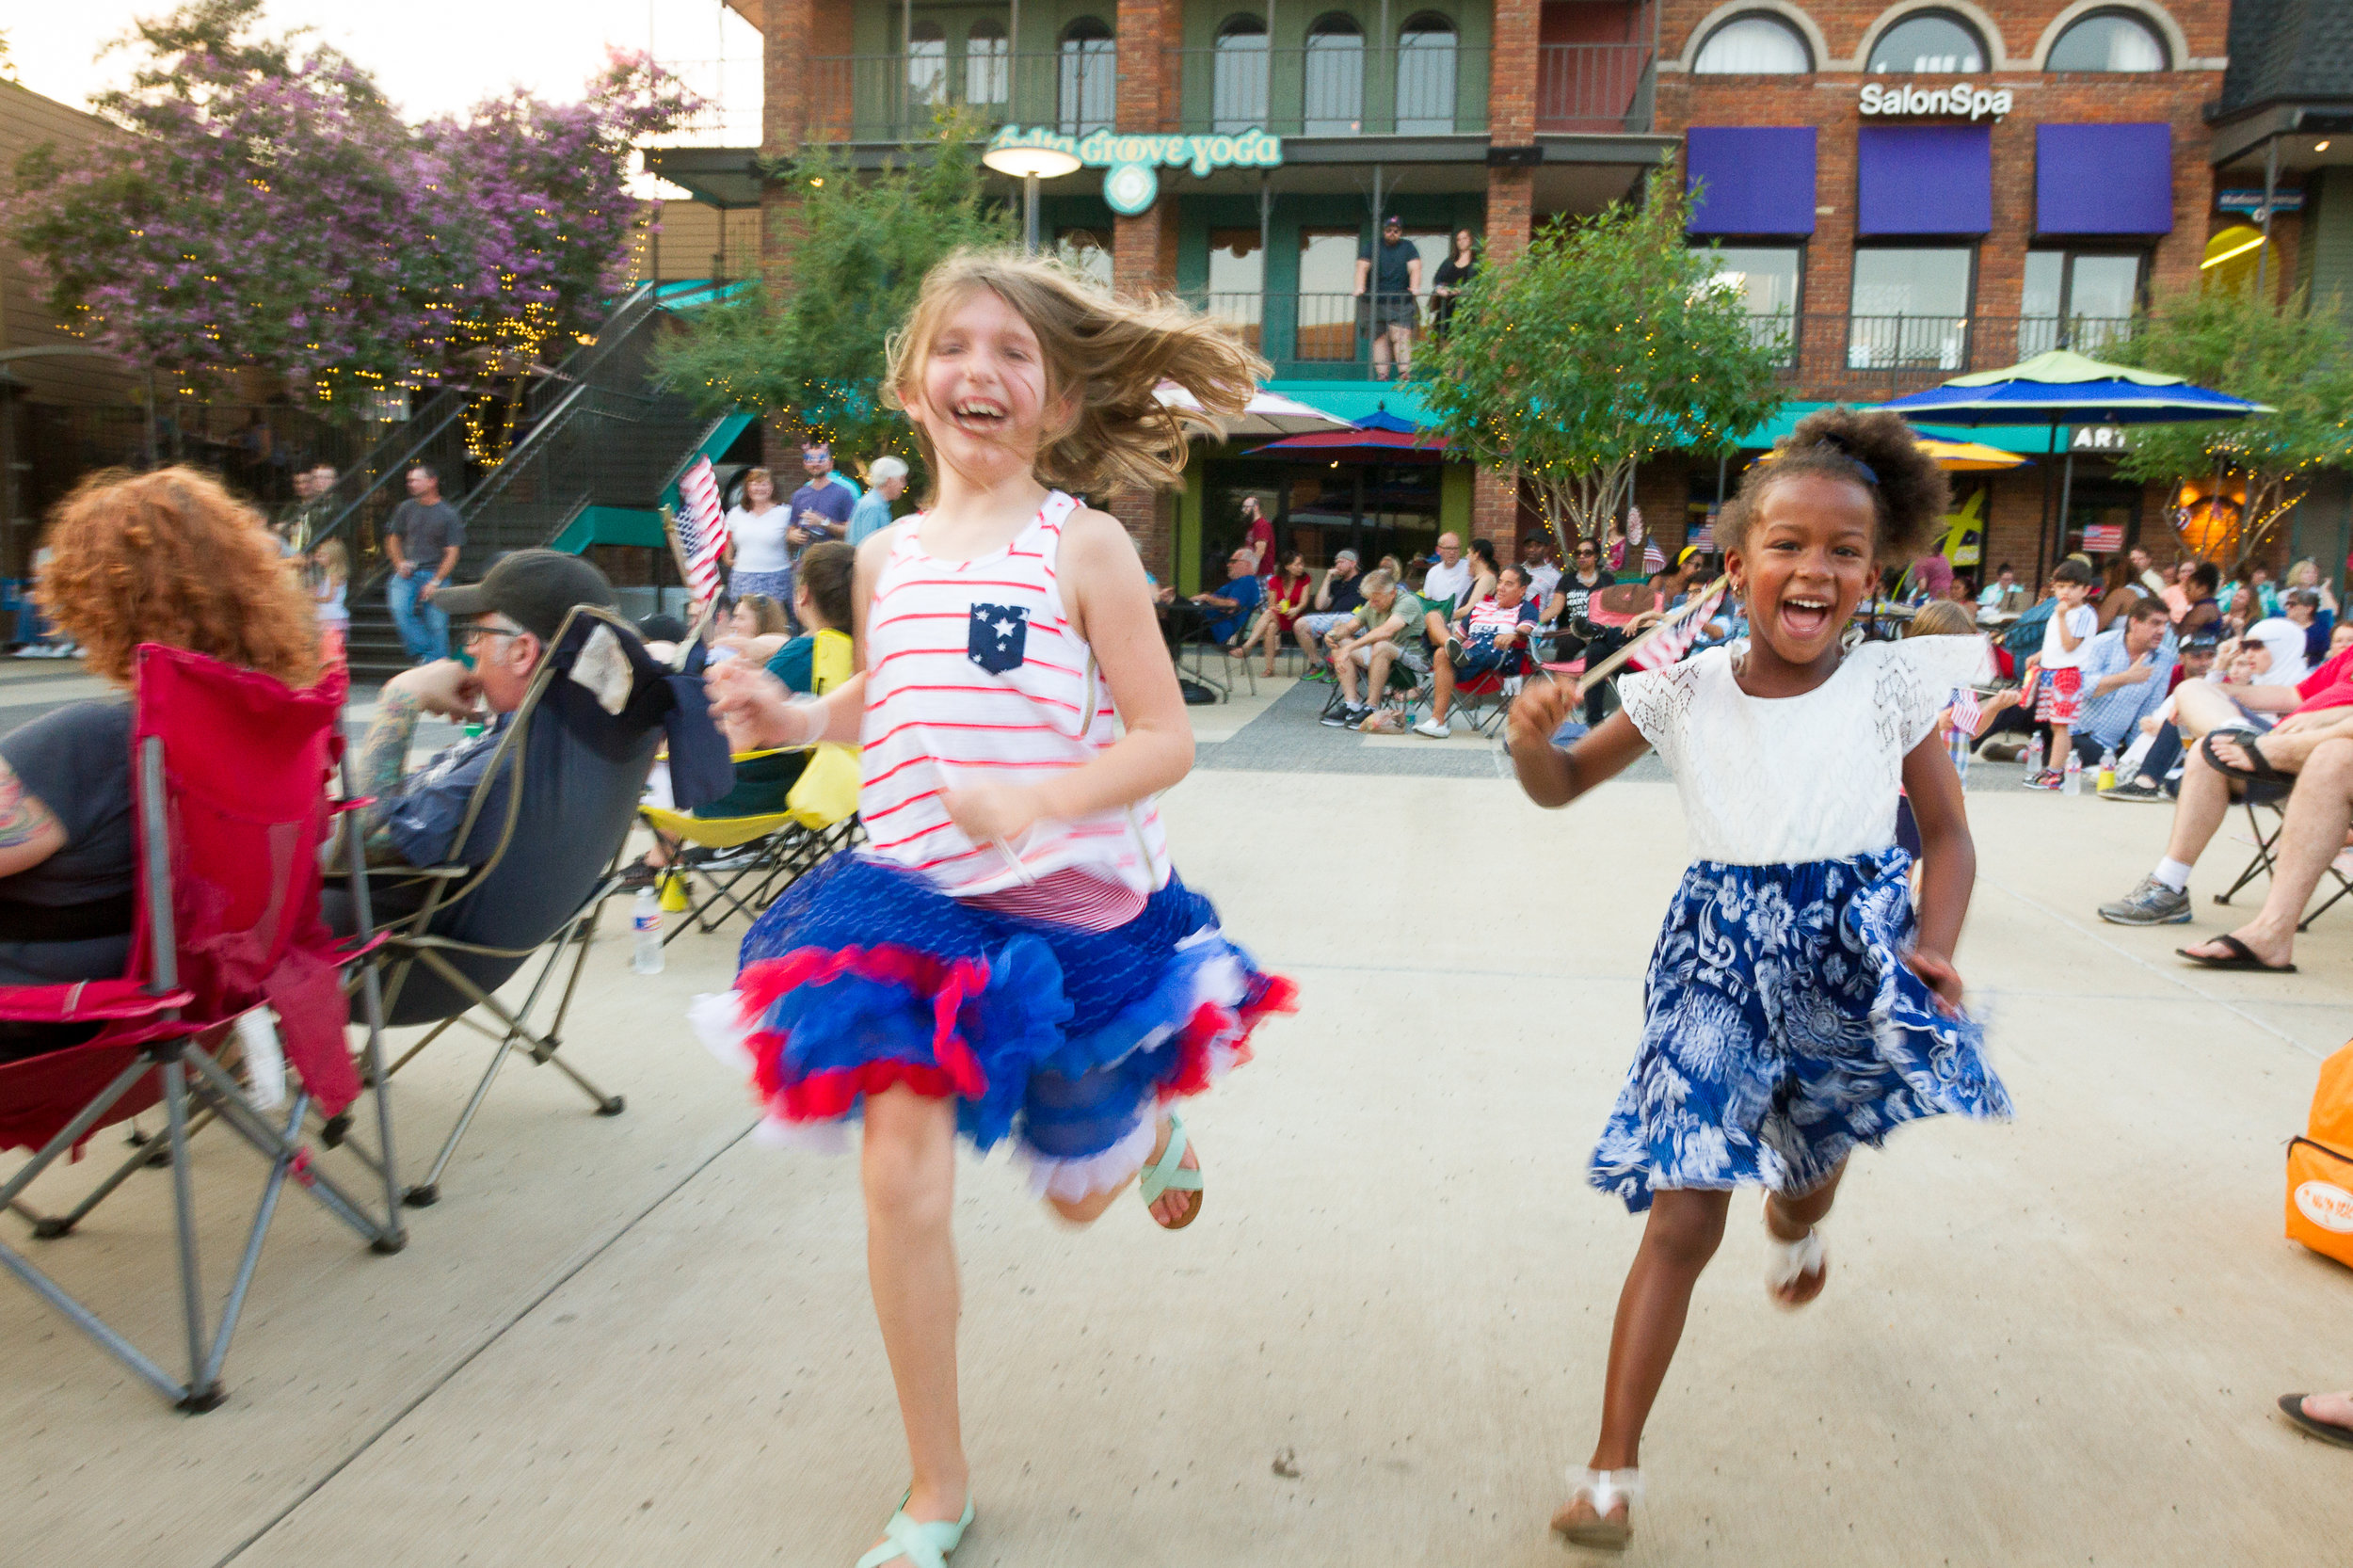  The Overton Square Independence Celebration hosts happy kids and toe-tapping entertainment 